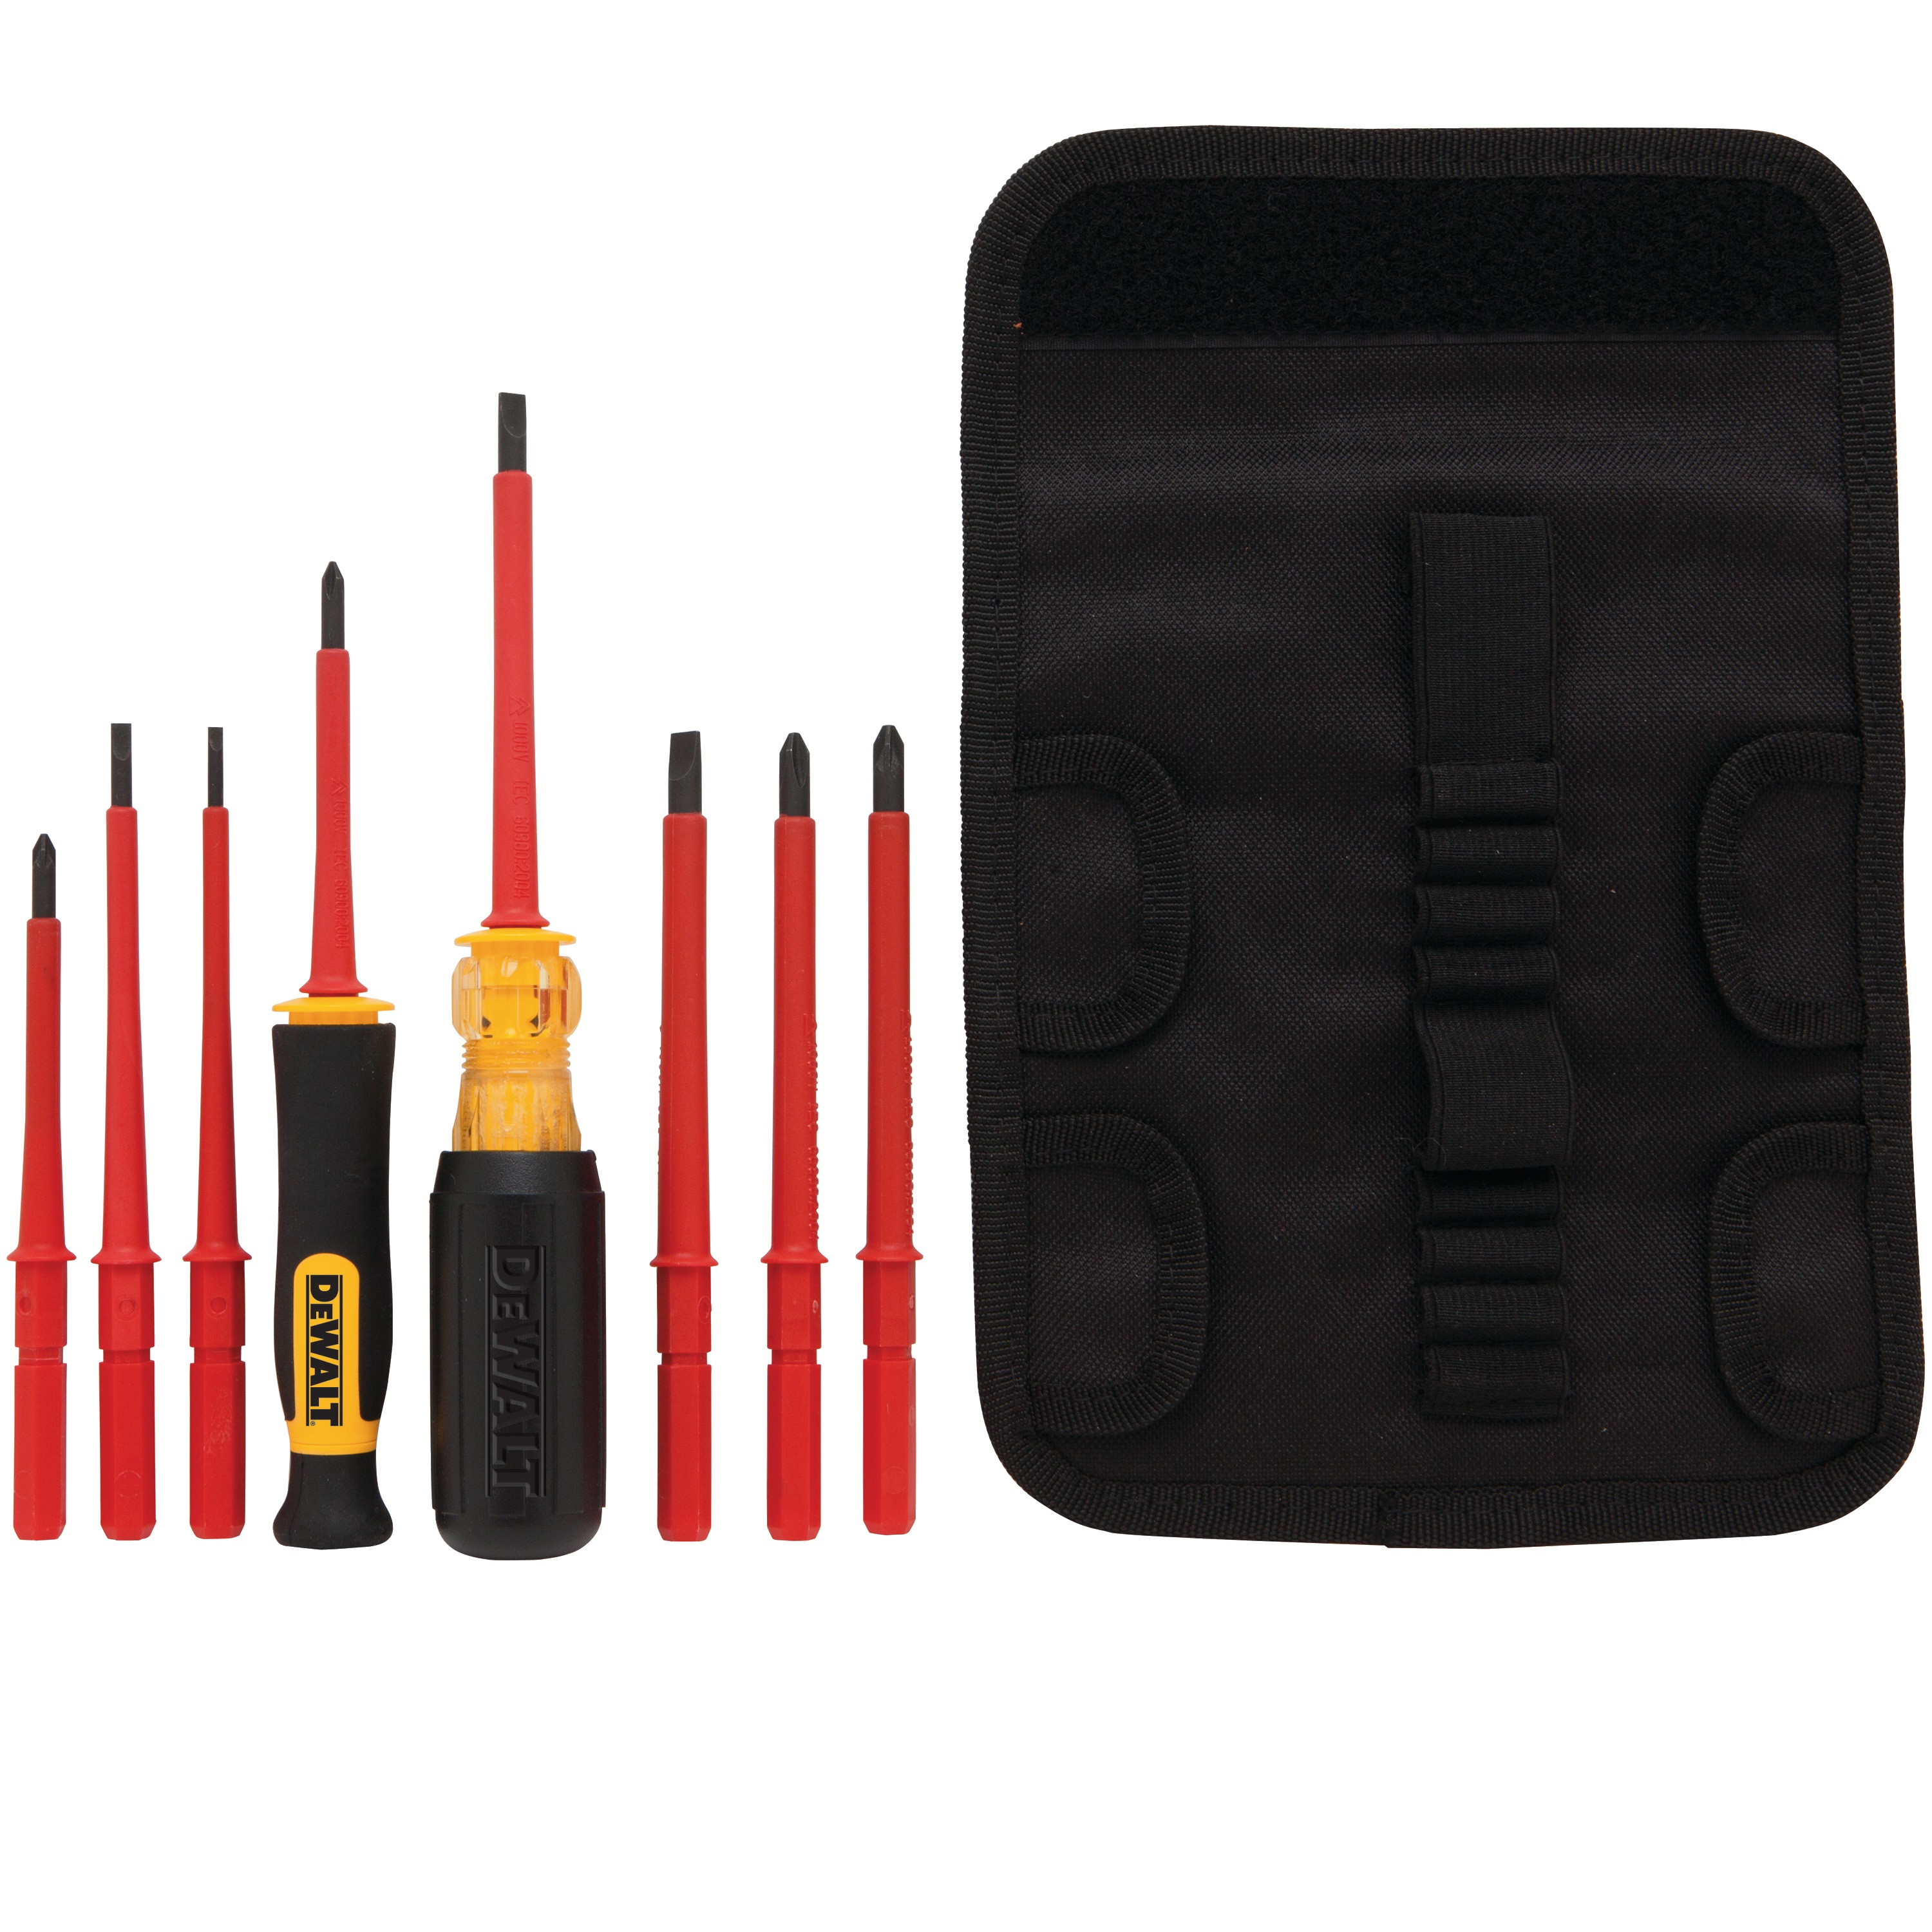 Insulated Vinyl Grip Screwdriver Set with tool pouch.